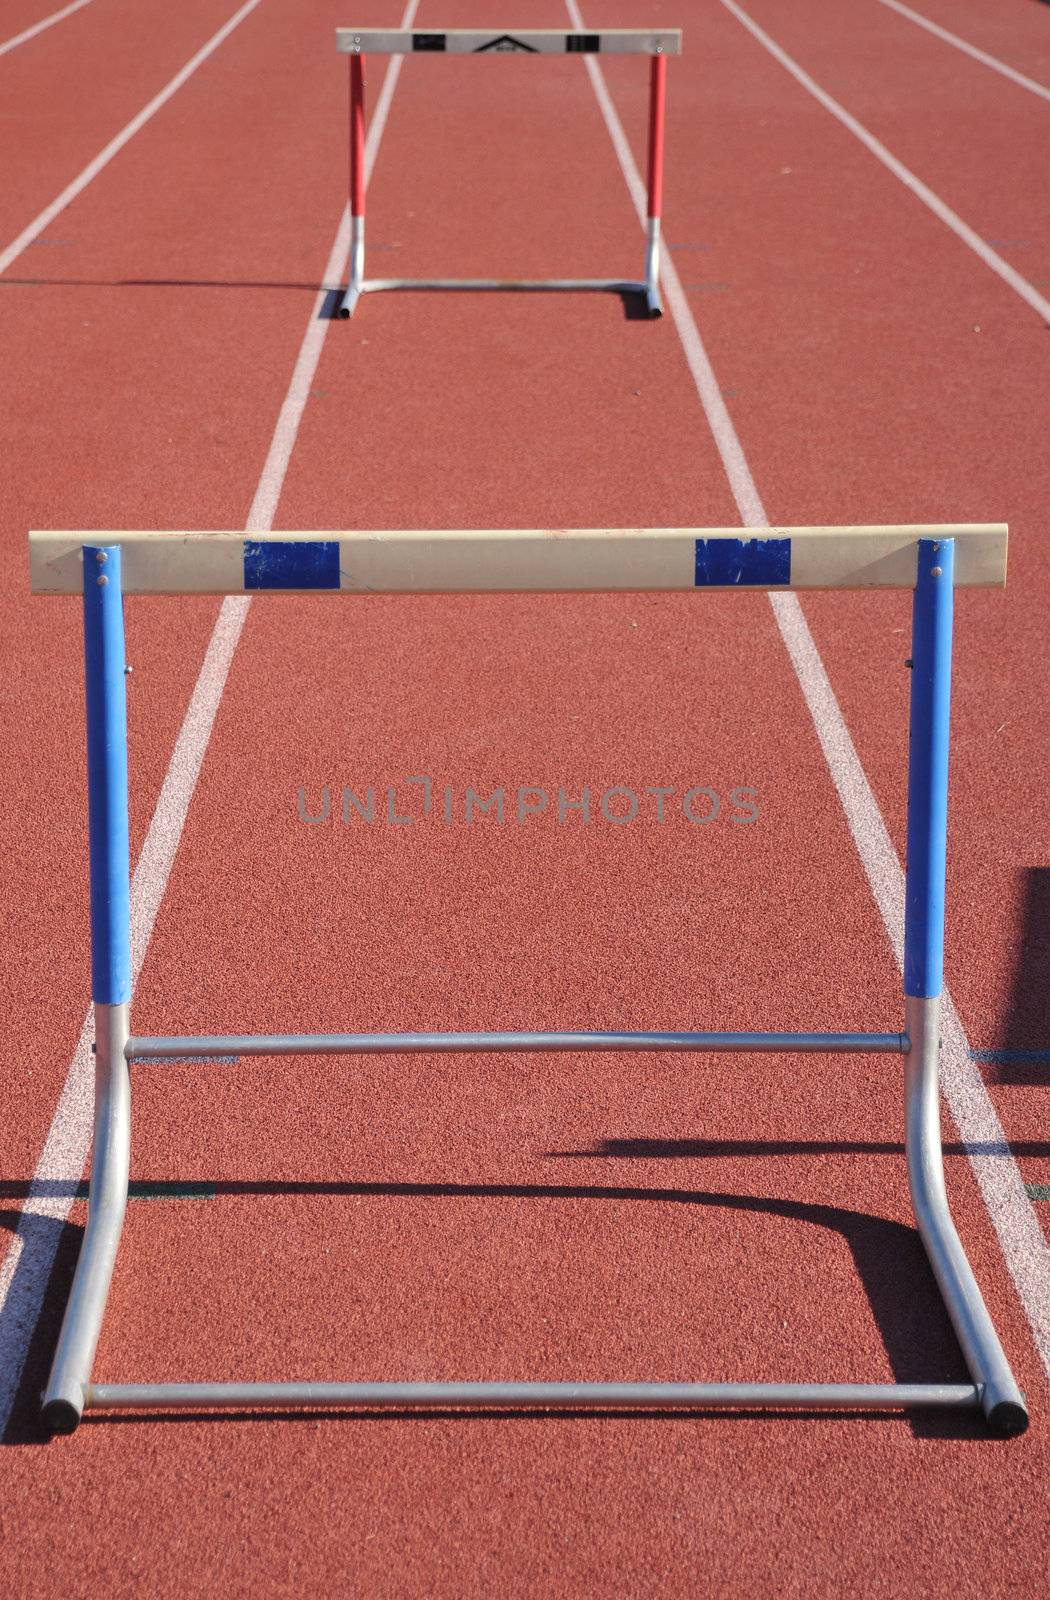 hurdle by PDImages